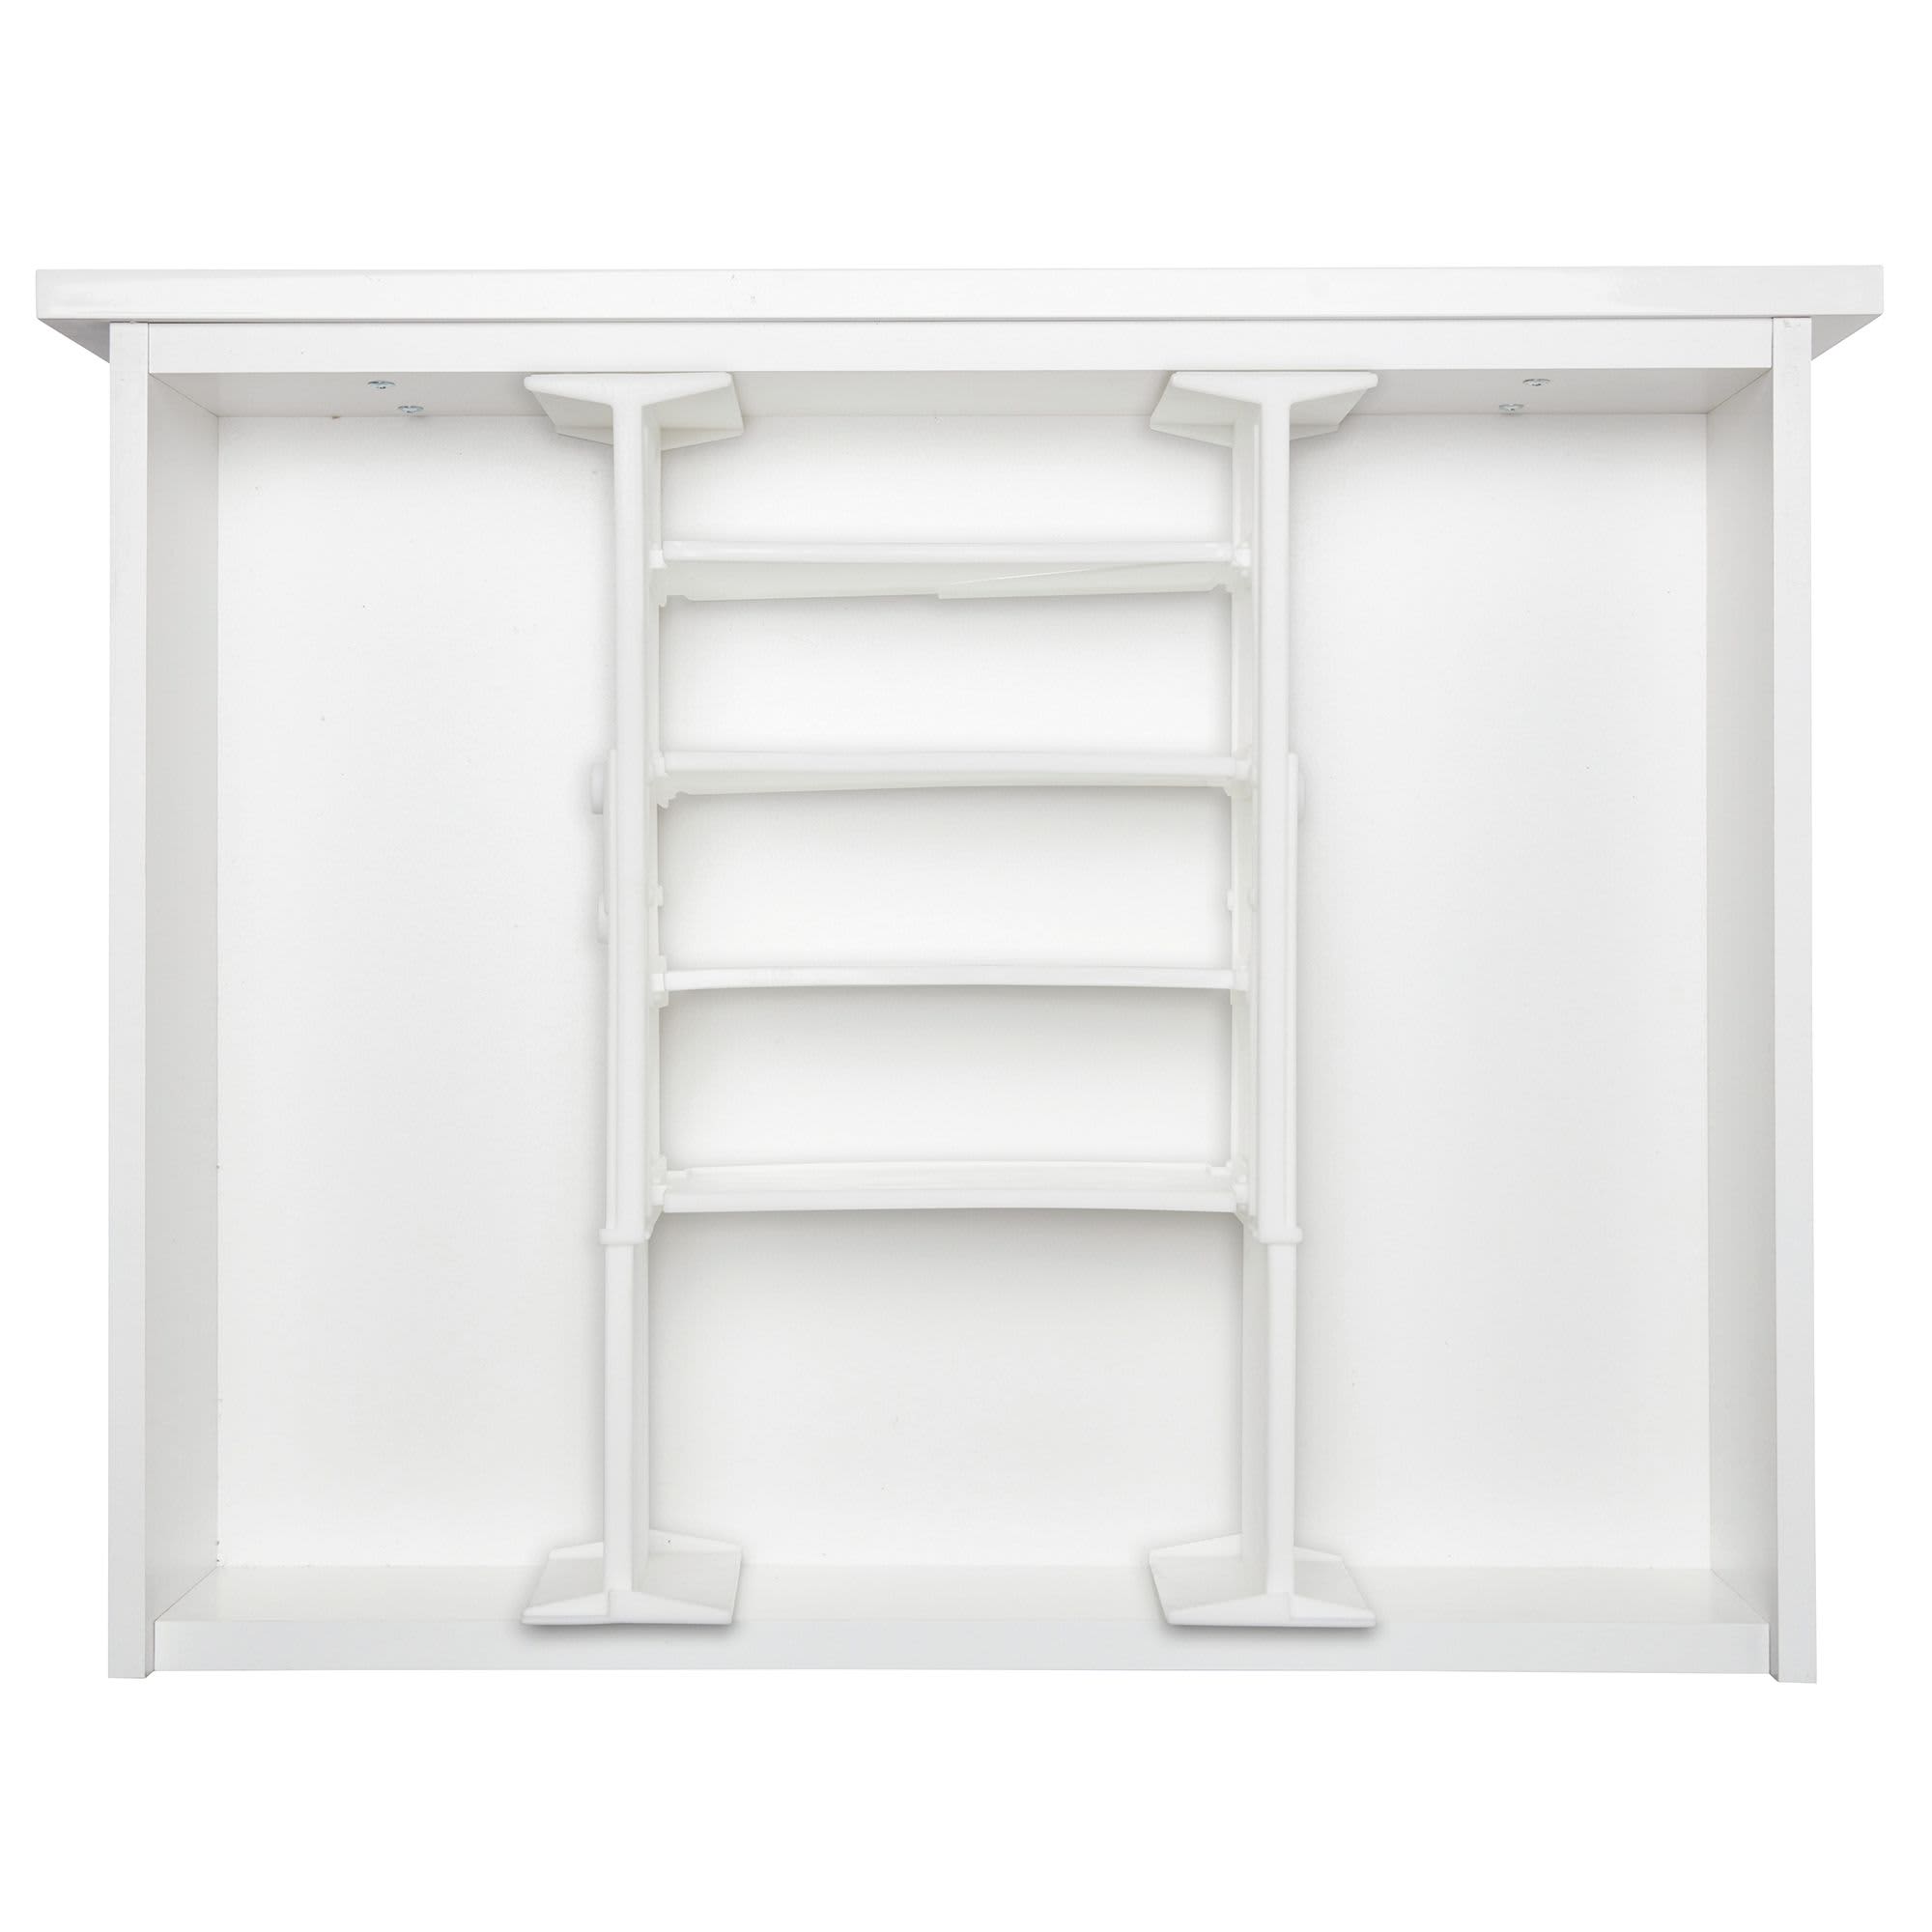 Search for Craft Cabinet  Discover our Best Deals at Bed Bath